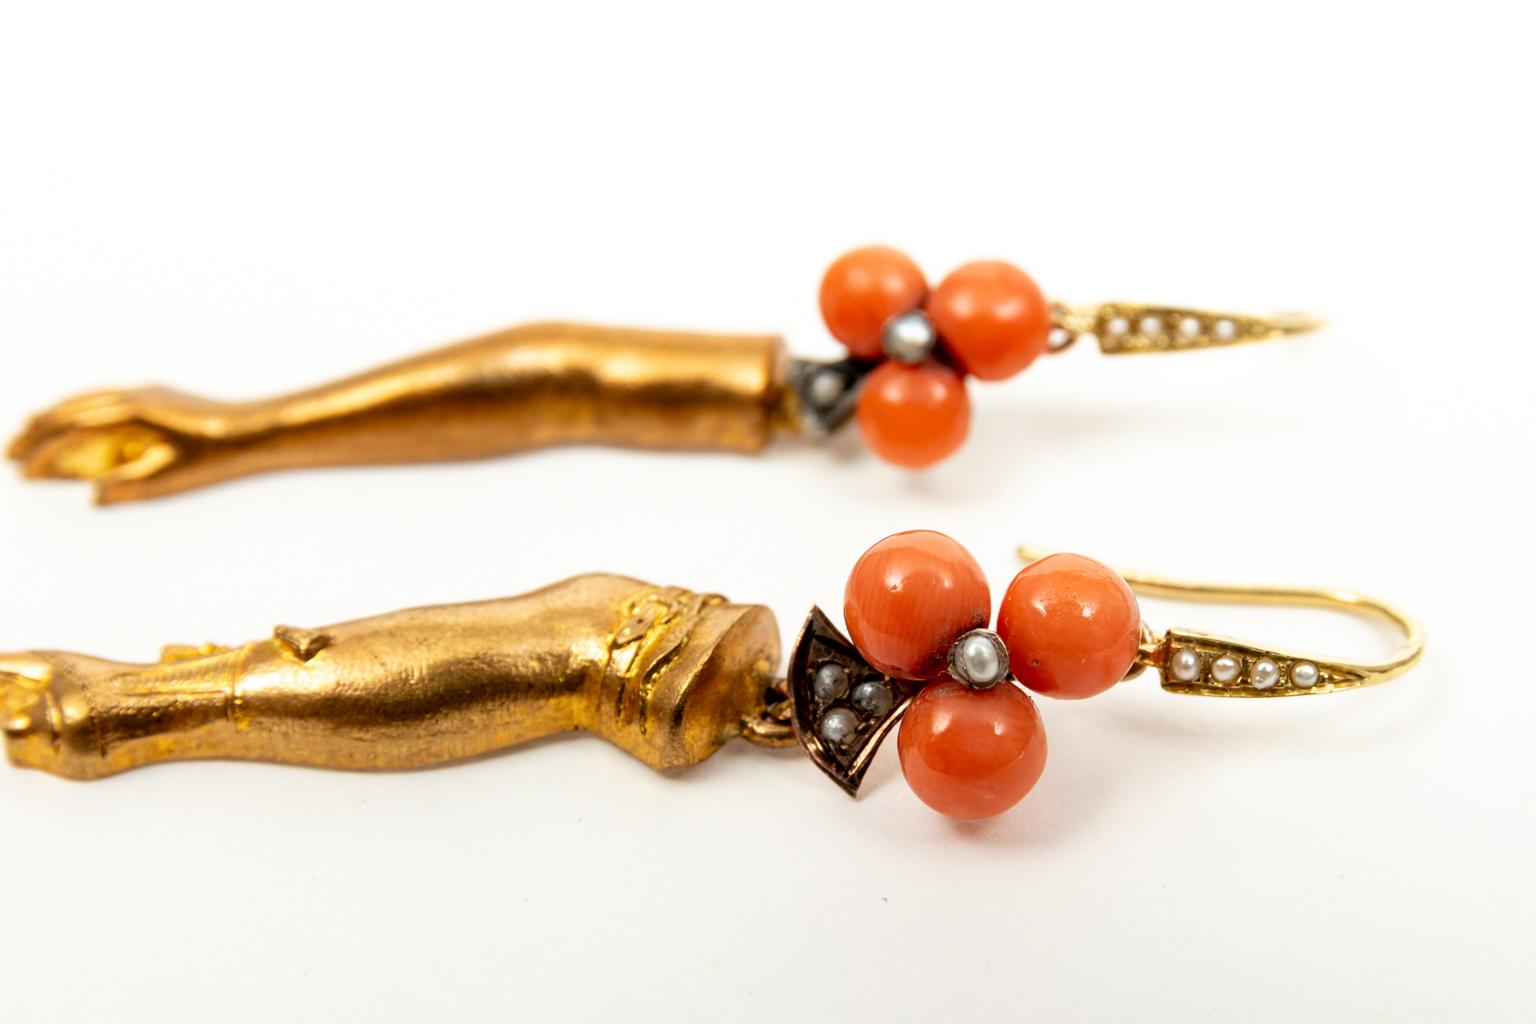 Pair of vermeil arm and leg earrings that feature sterling coral and seed pearl antique clover earrings on 18 karat yellow gold and seed pearl ear wires. Made in the United States by Katherine Wallach. The piece is contemporary made using vintage